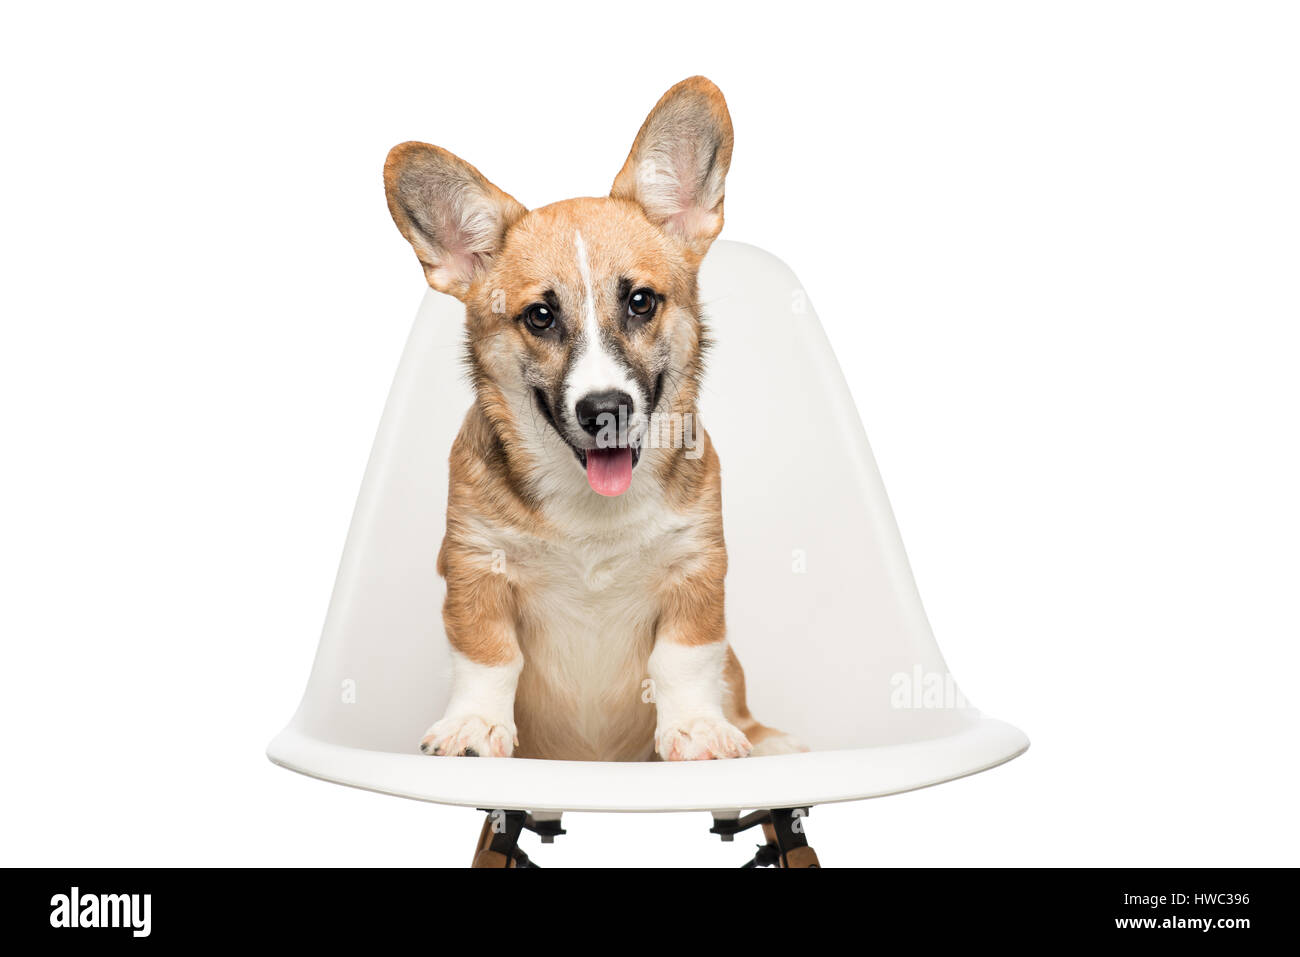 Pembroke Welsh Corgi puppy sitting on chair. looking at camera. isolated on white background Stock Photo